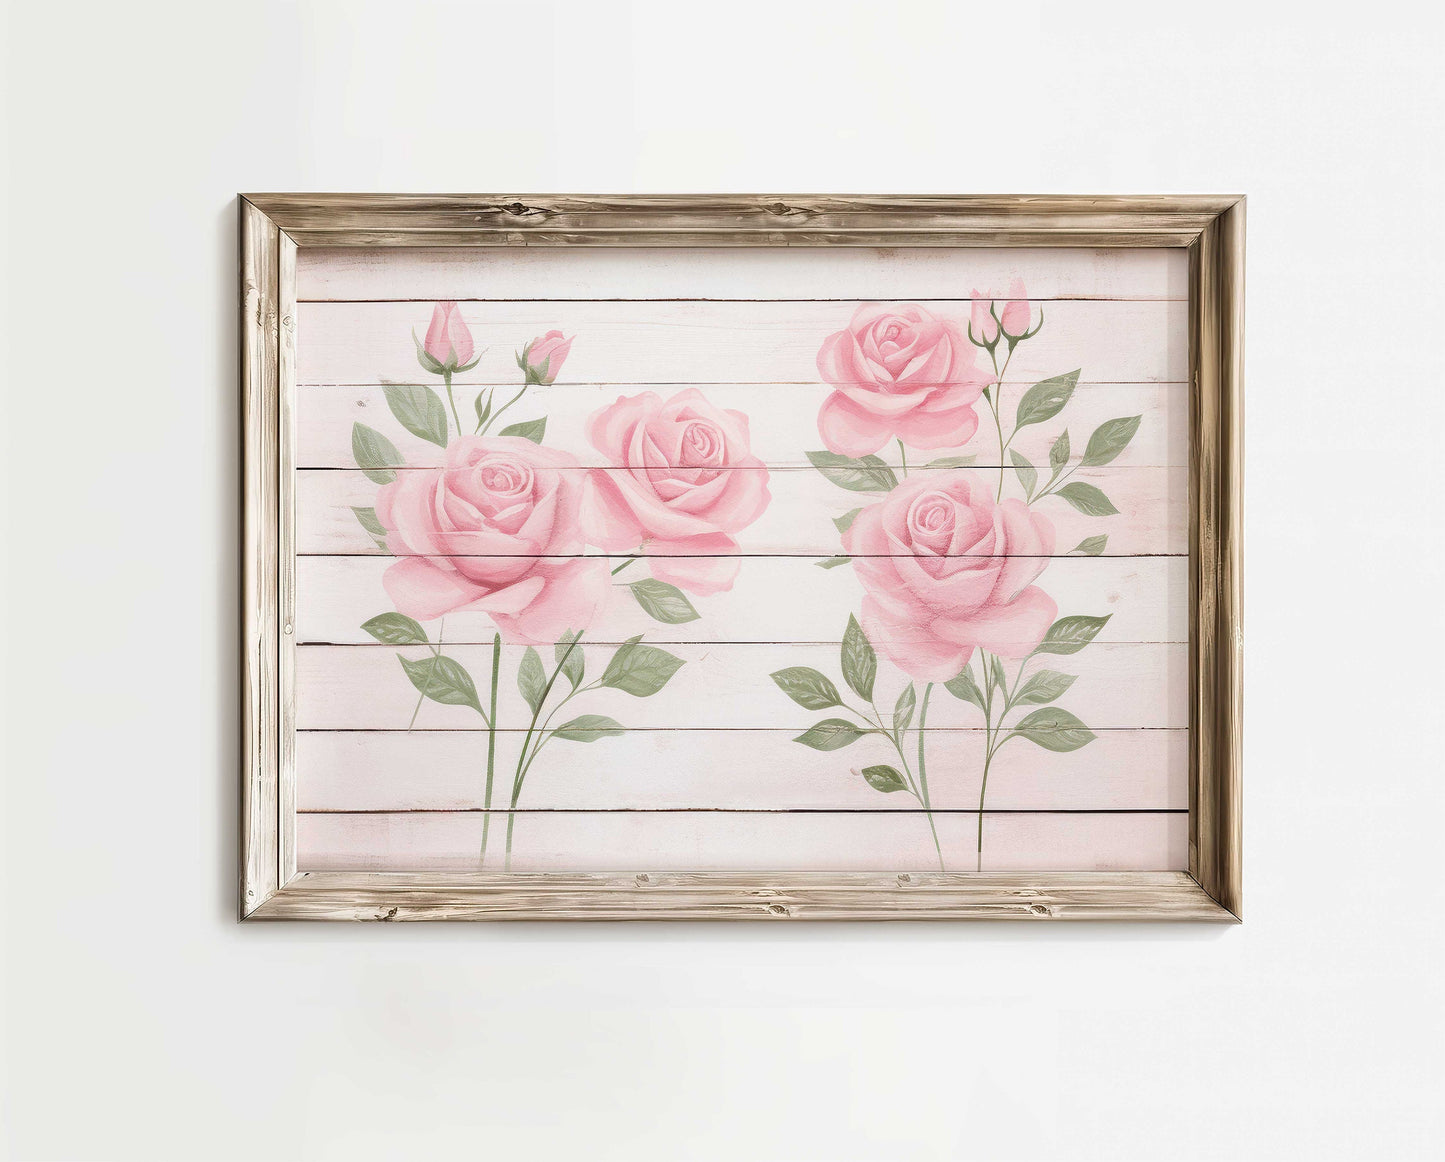 Pink Rose Art Print, Rose Print, Floral Farmhouse Decor, Rustic Wall Decor, Rose Wall Art, Country Style Home Decor, PRINTABLE Flower Art